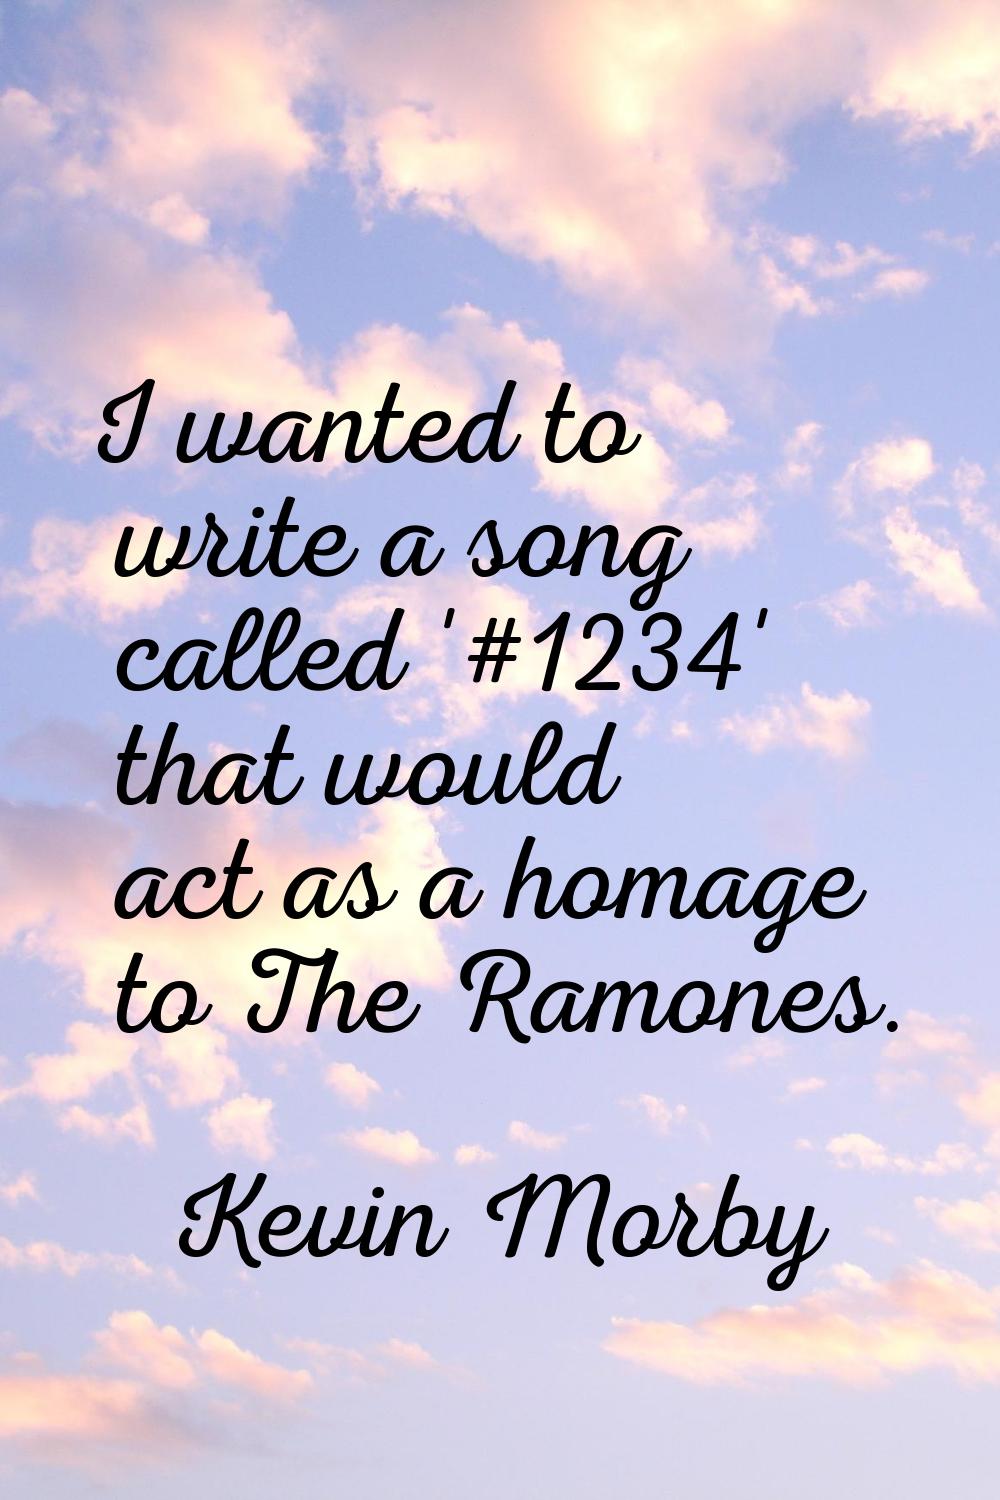 I wanted to write a song called '#1234' that would act as a homage to The Ramones.